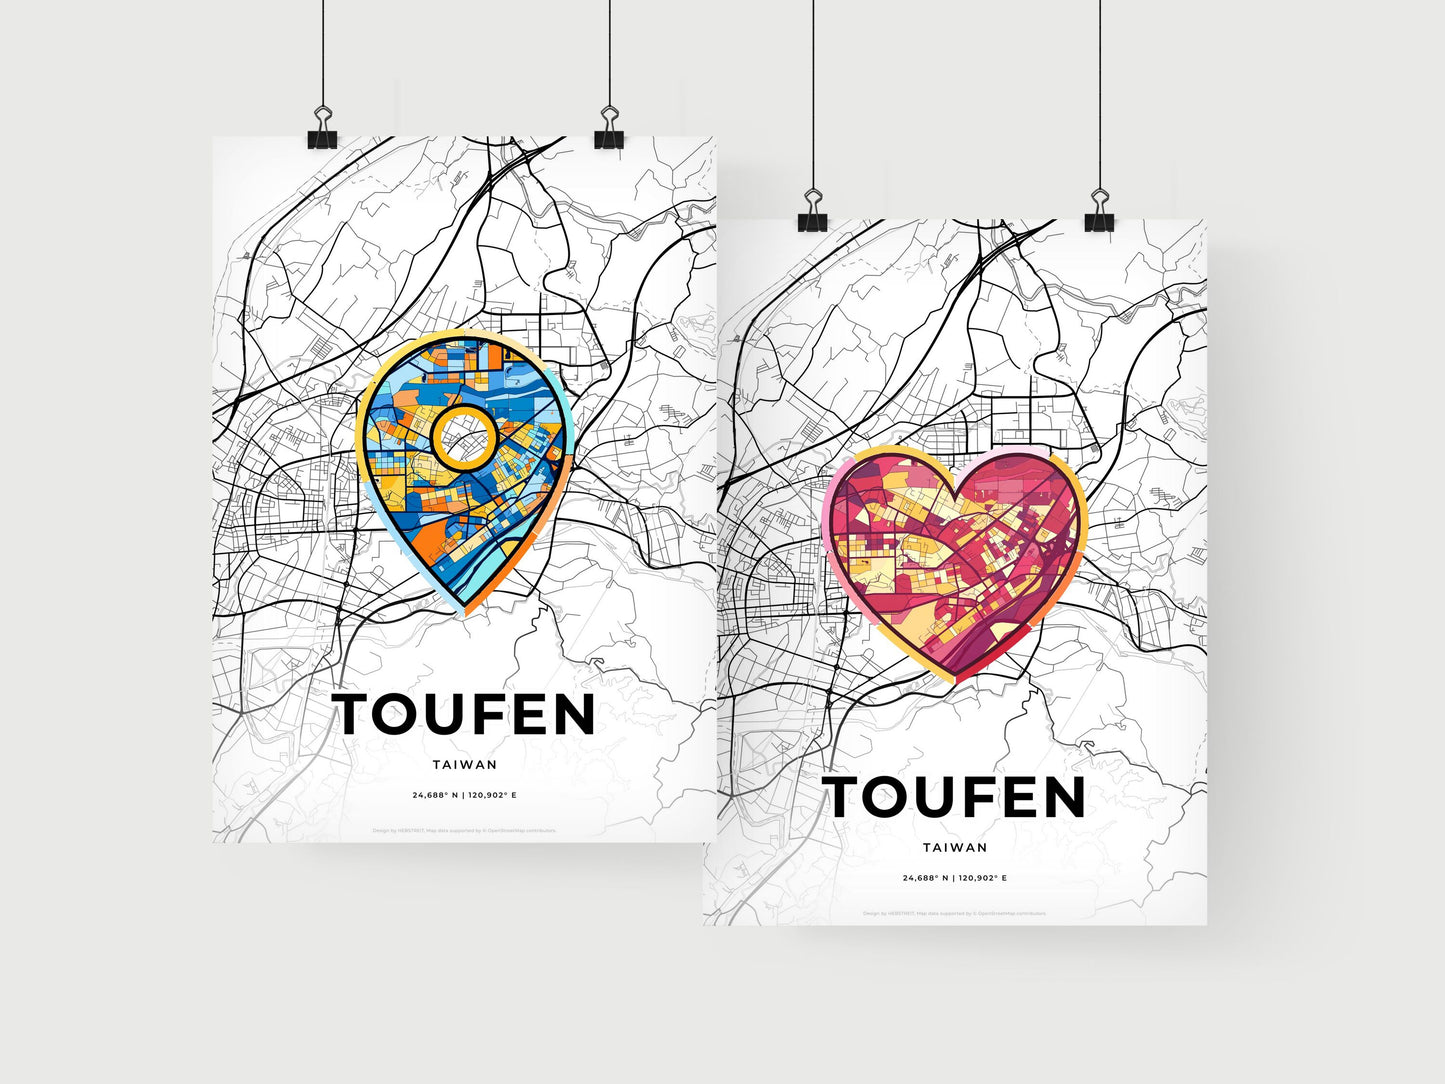 TOUFEN TAIWAN minimal art map with a colorful icon.